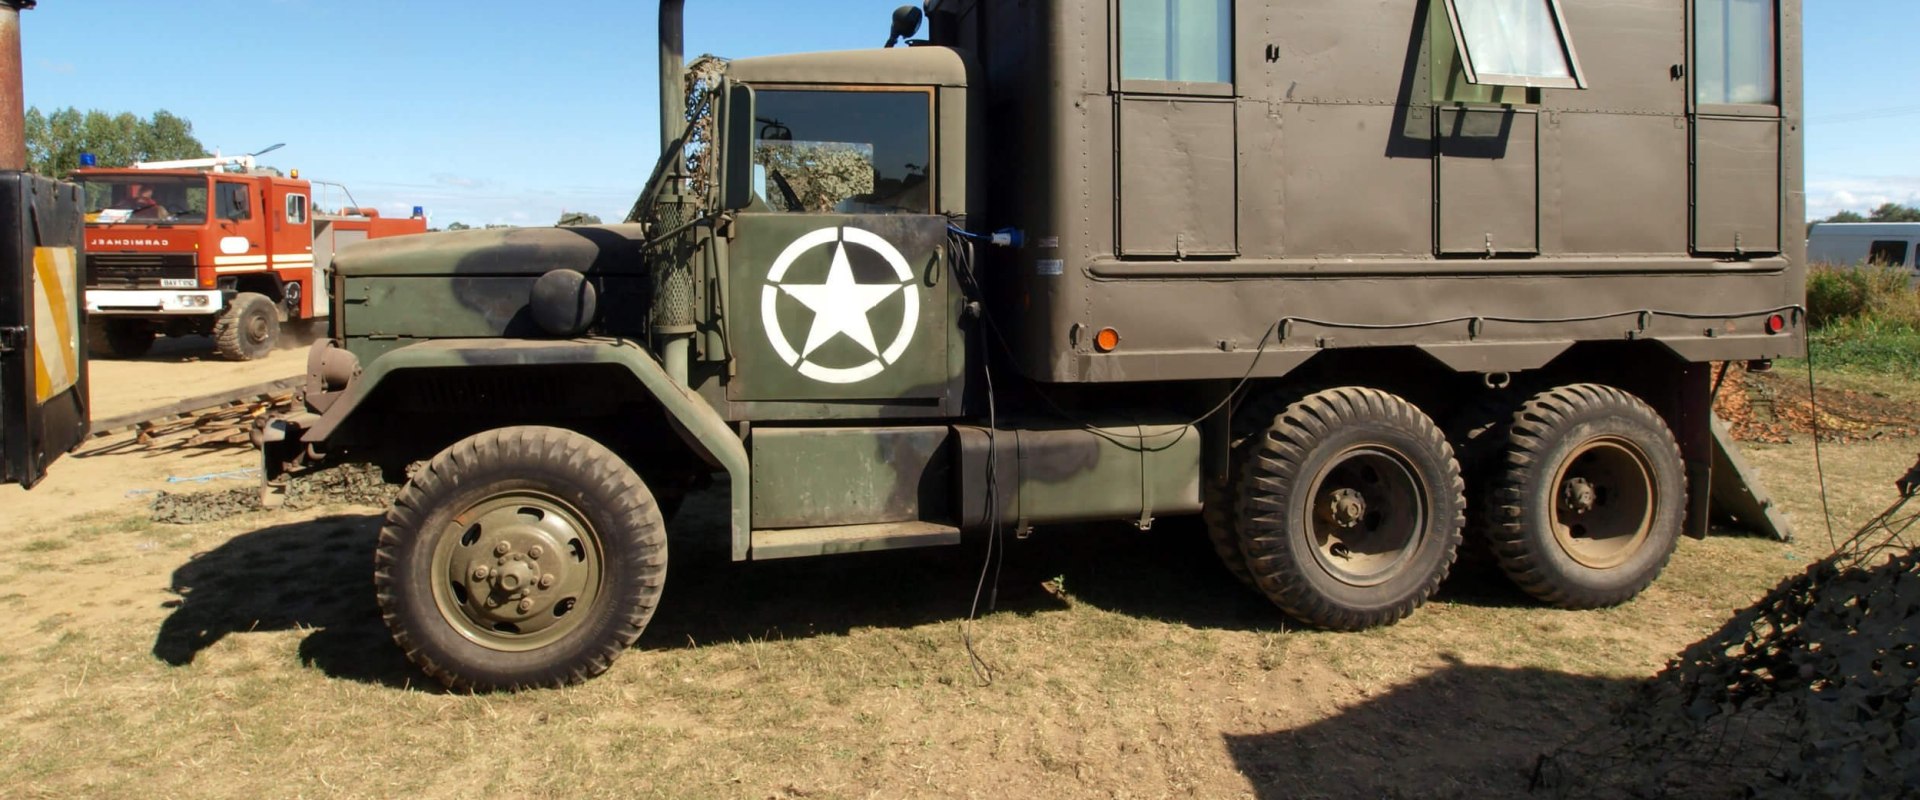 What Are the Costs of Buying or Renting a Military Truck?